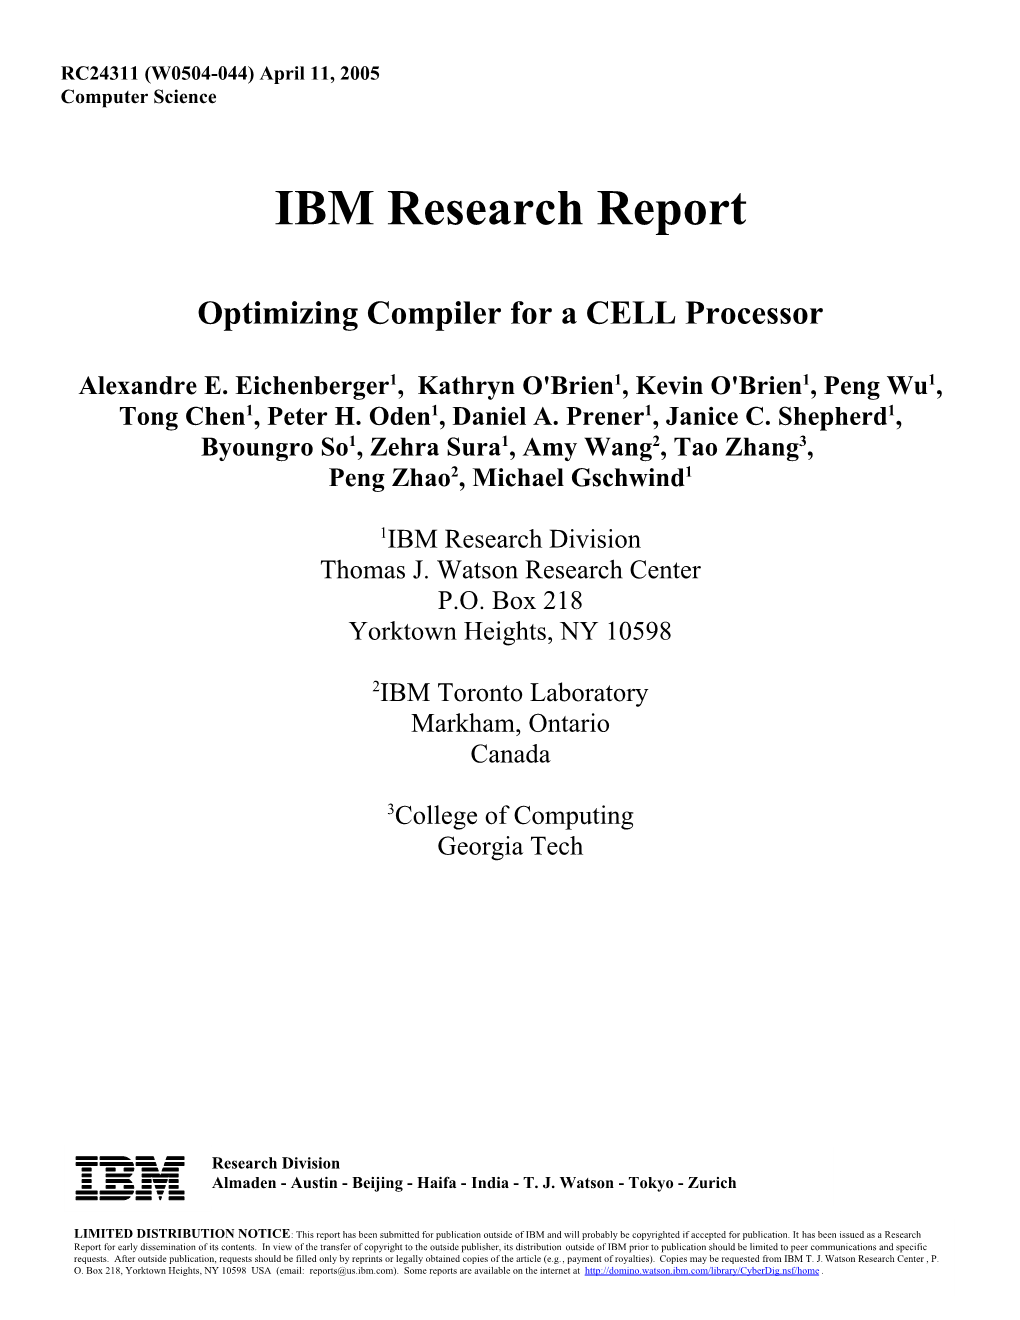 Optimizing Compiler for a CELL Processor